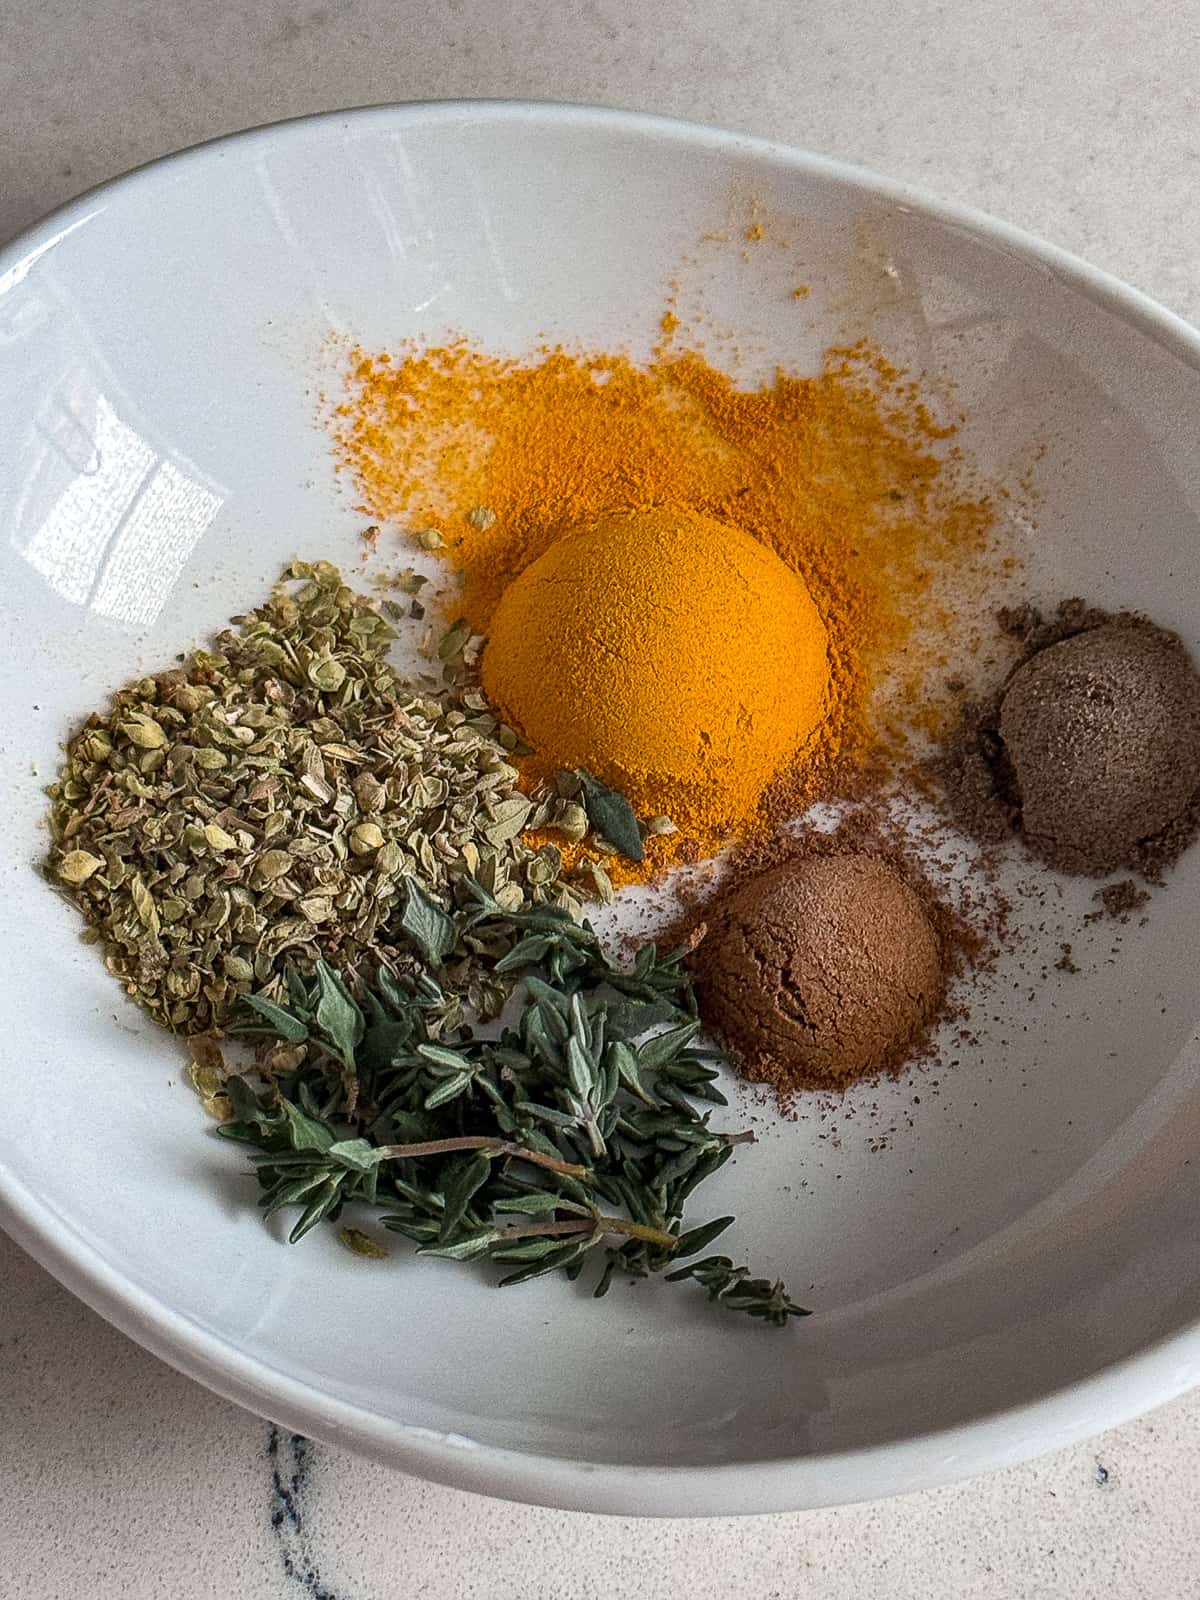 Spice Ingredients To Make Turmeric Chicken Breast Recipe